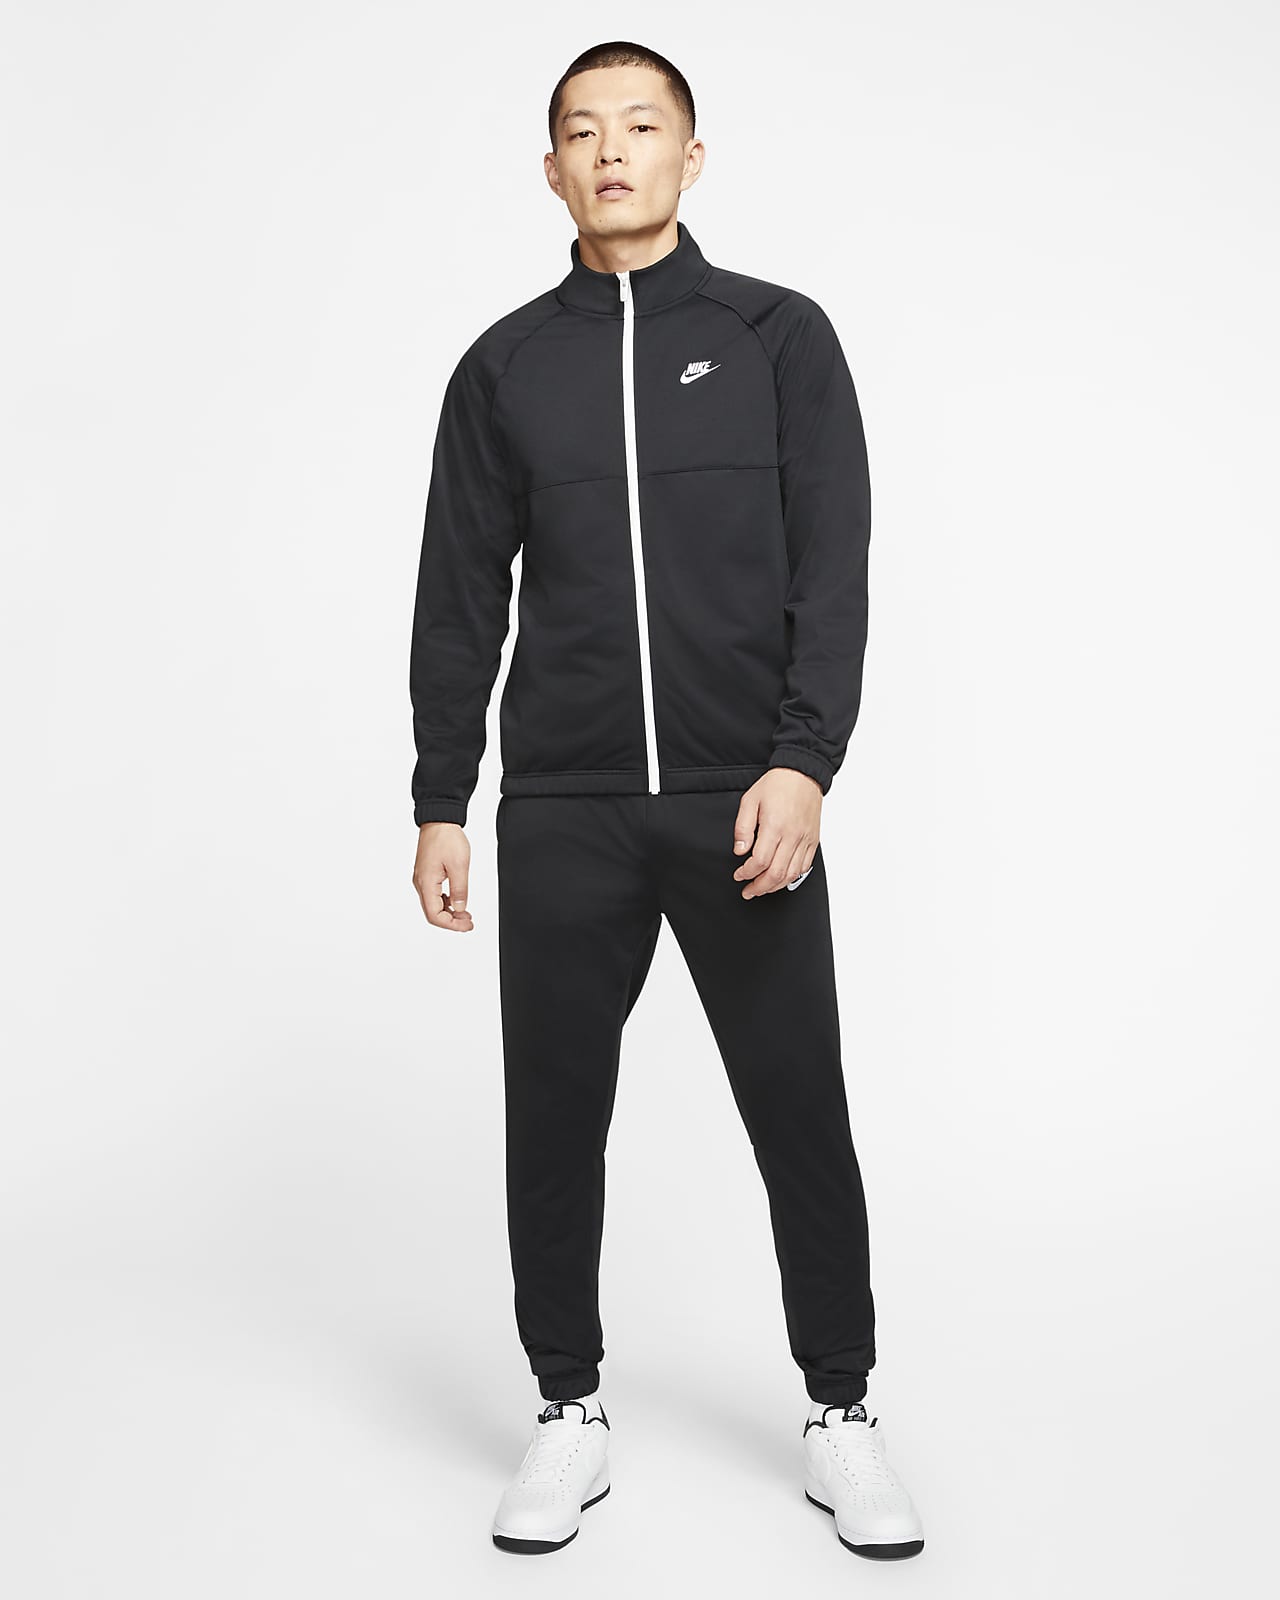 chandal completo nike hombre